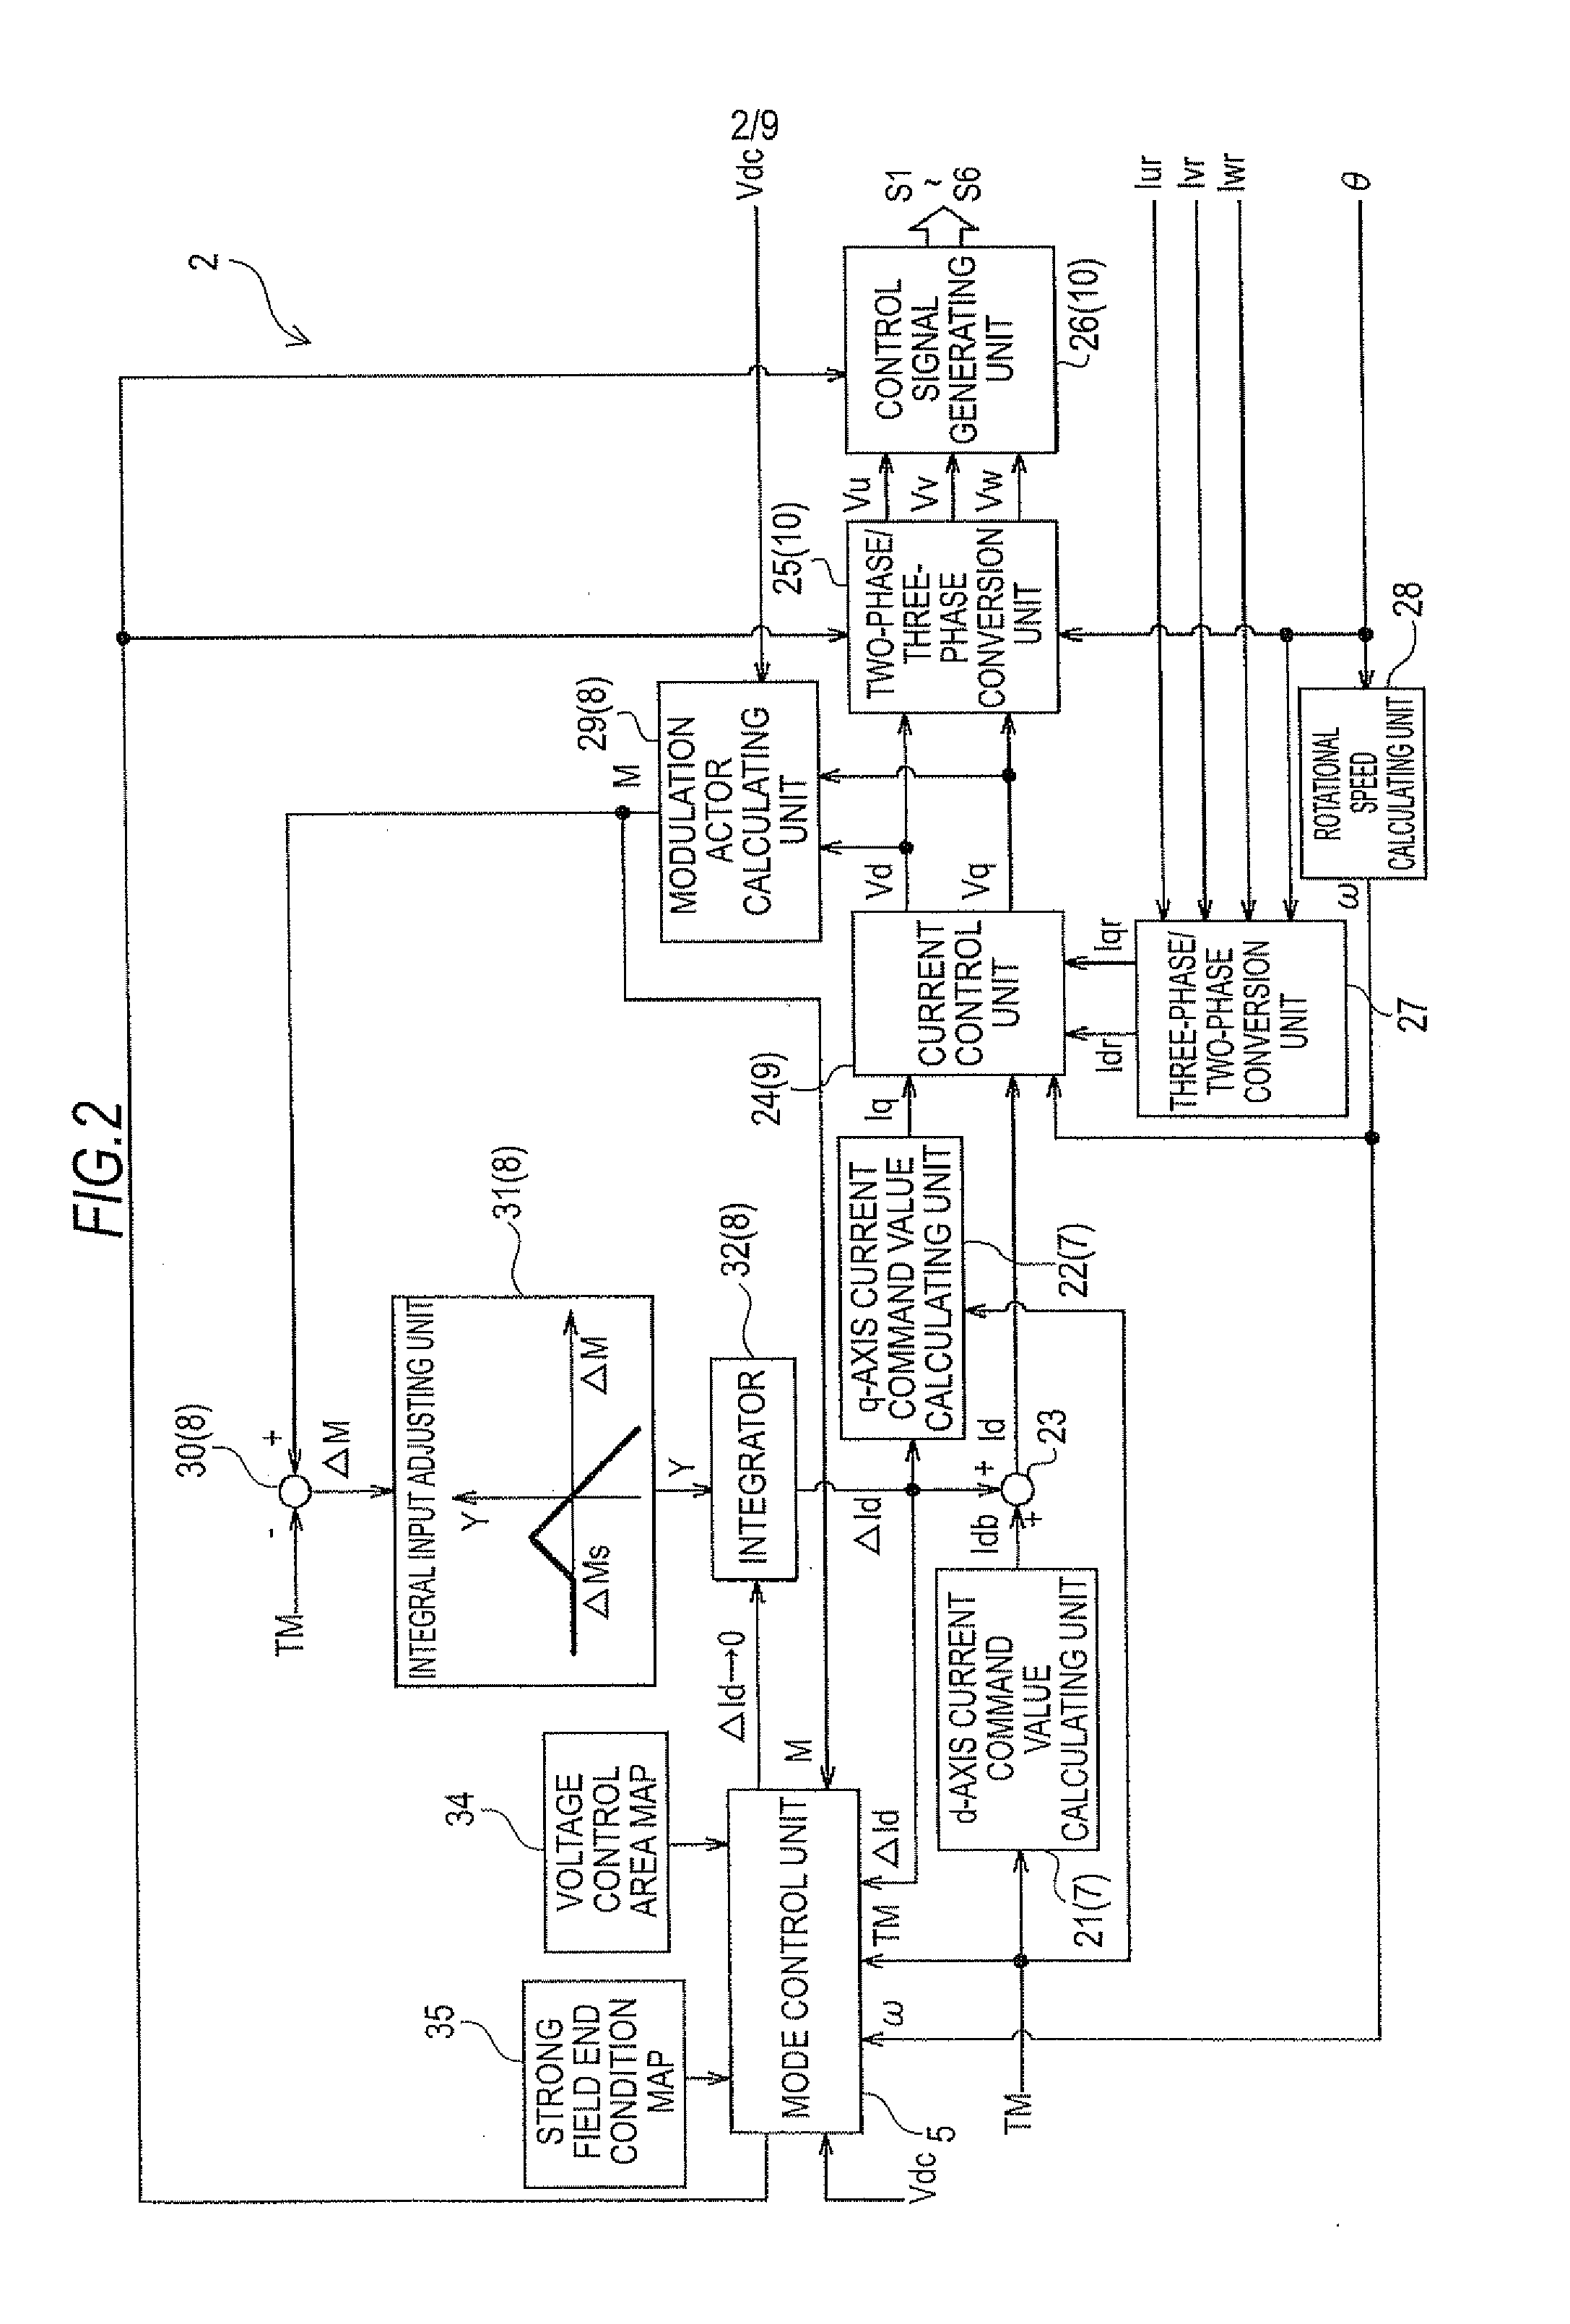 Control device of motor driving apparatus